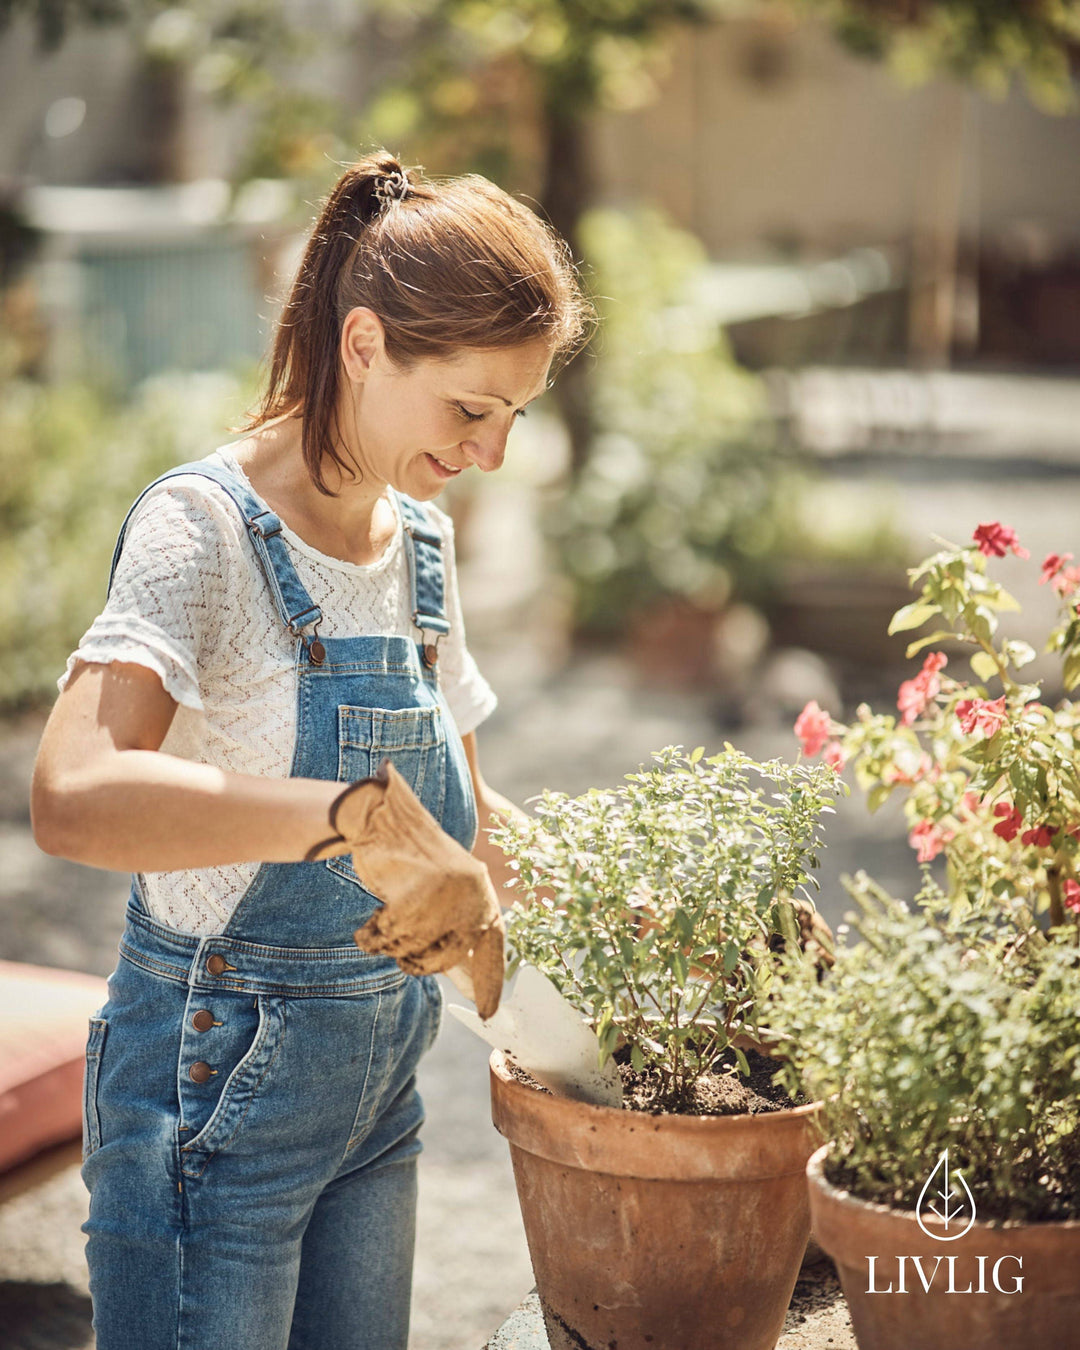 a woman is working in a garden with potted plants